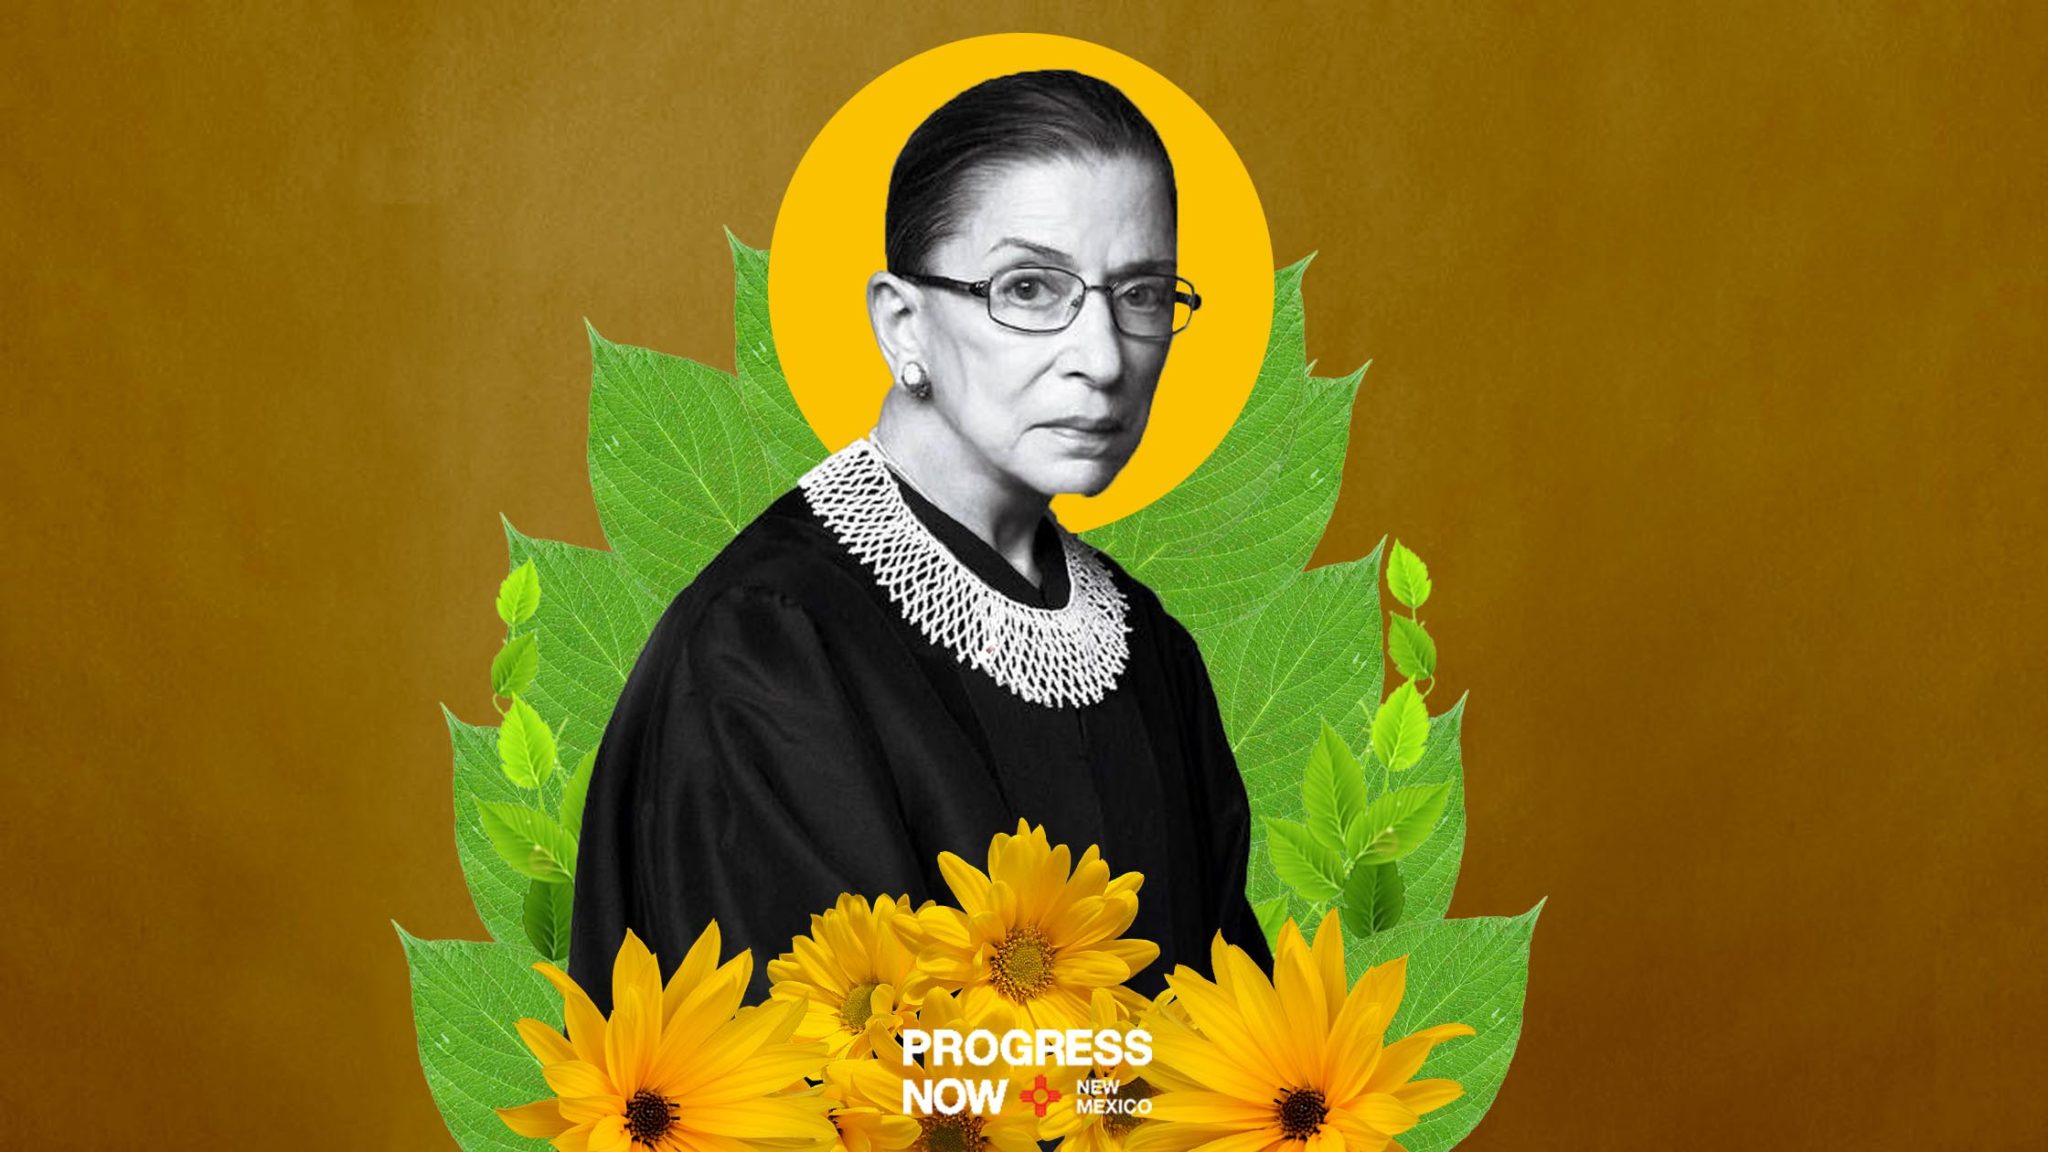 Be Remembered in Revolution, Ruth Bader Ginsburg